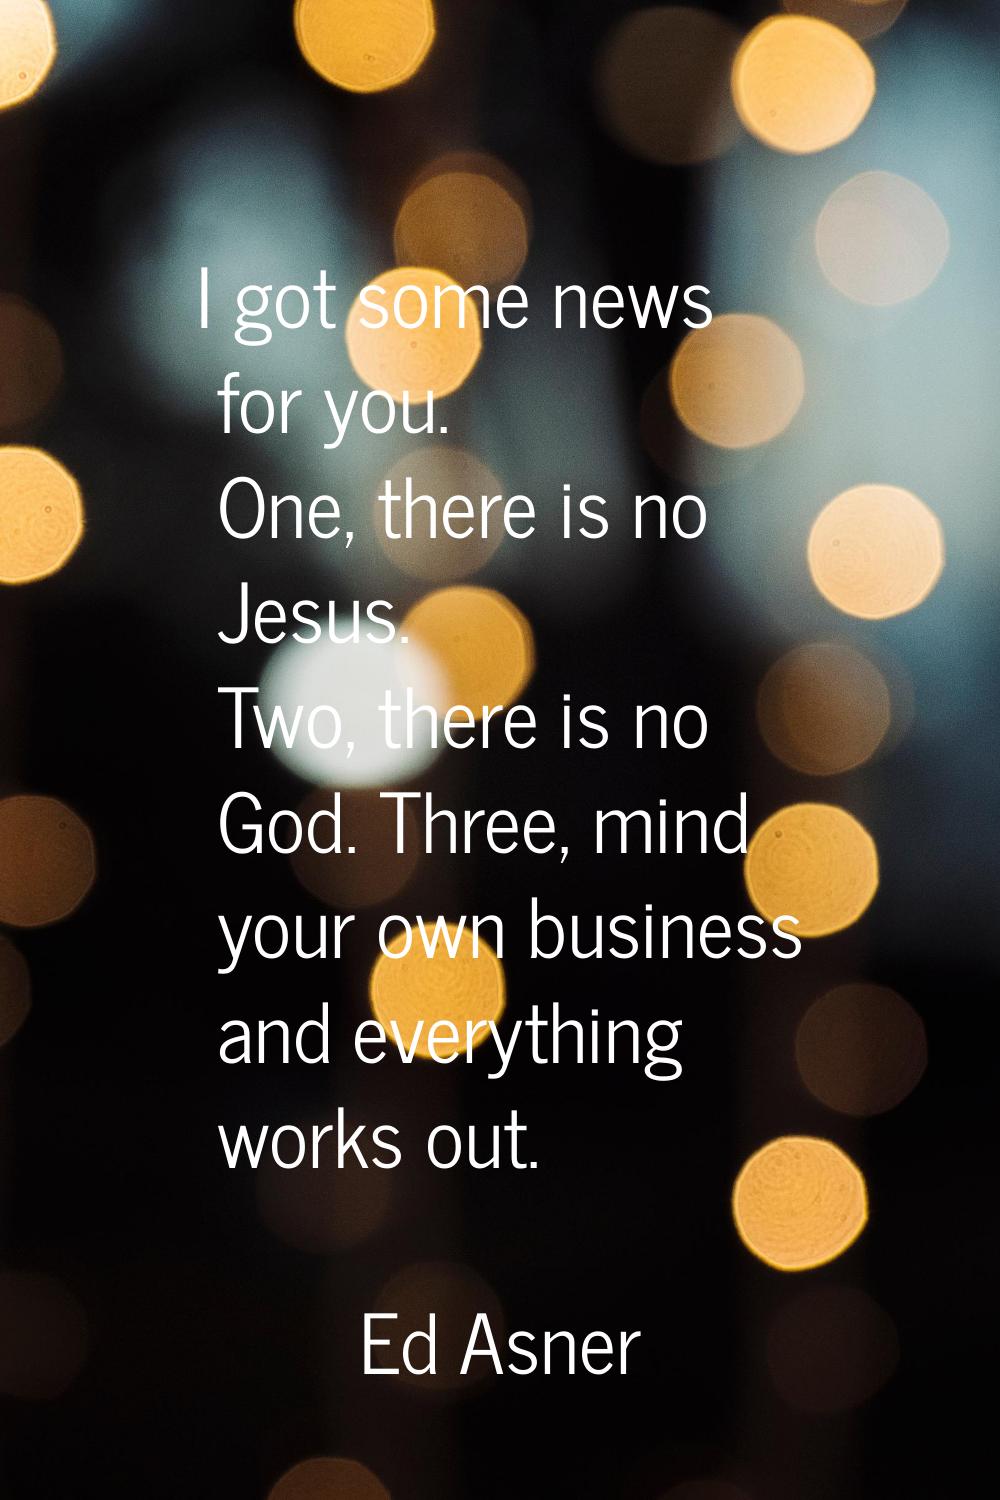 I got some news for you. One, there is no Jesus. Two, there is no God. Three, mind your own busines